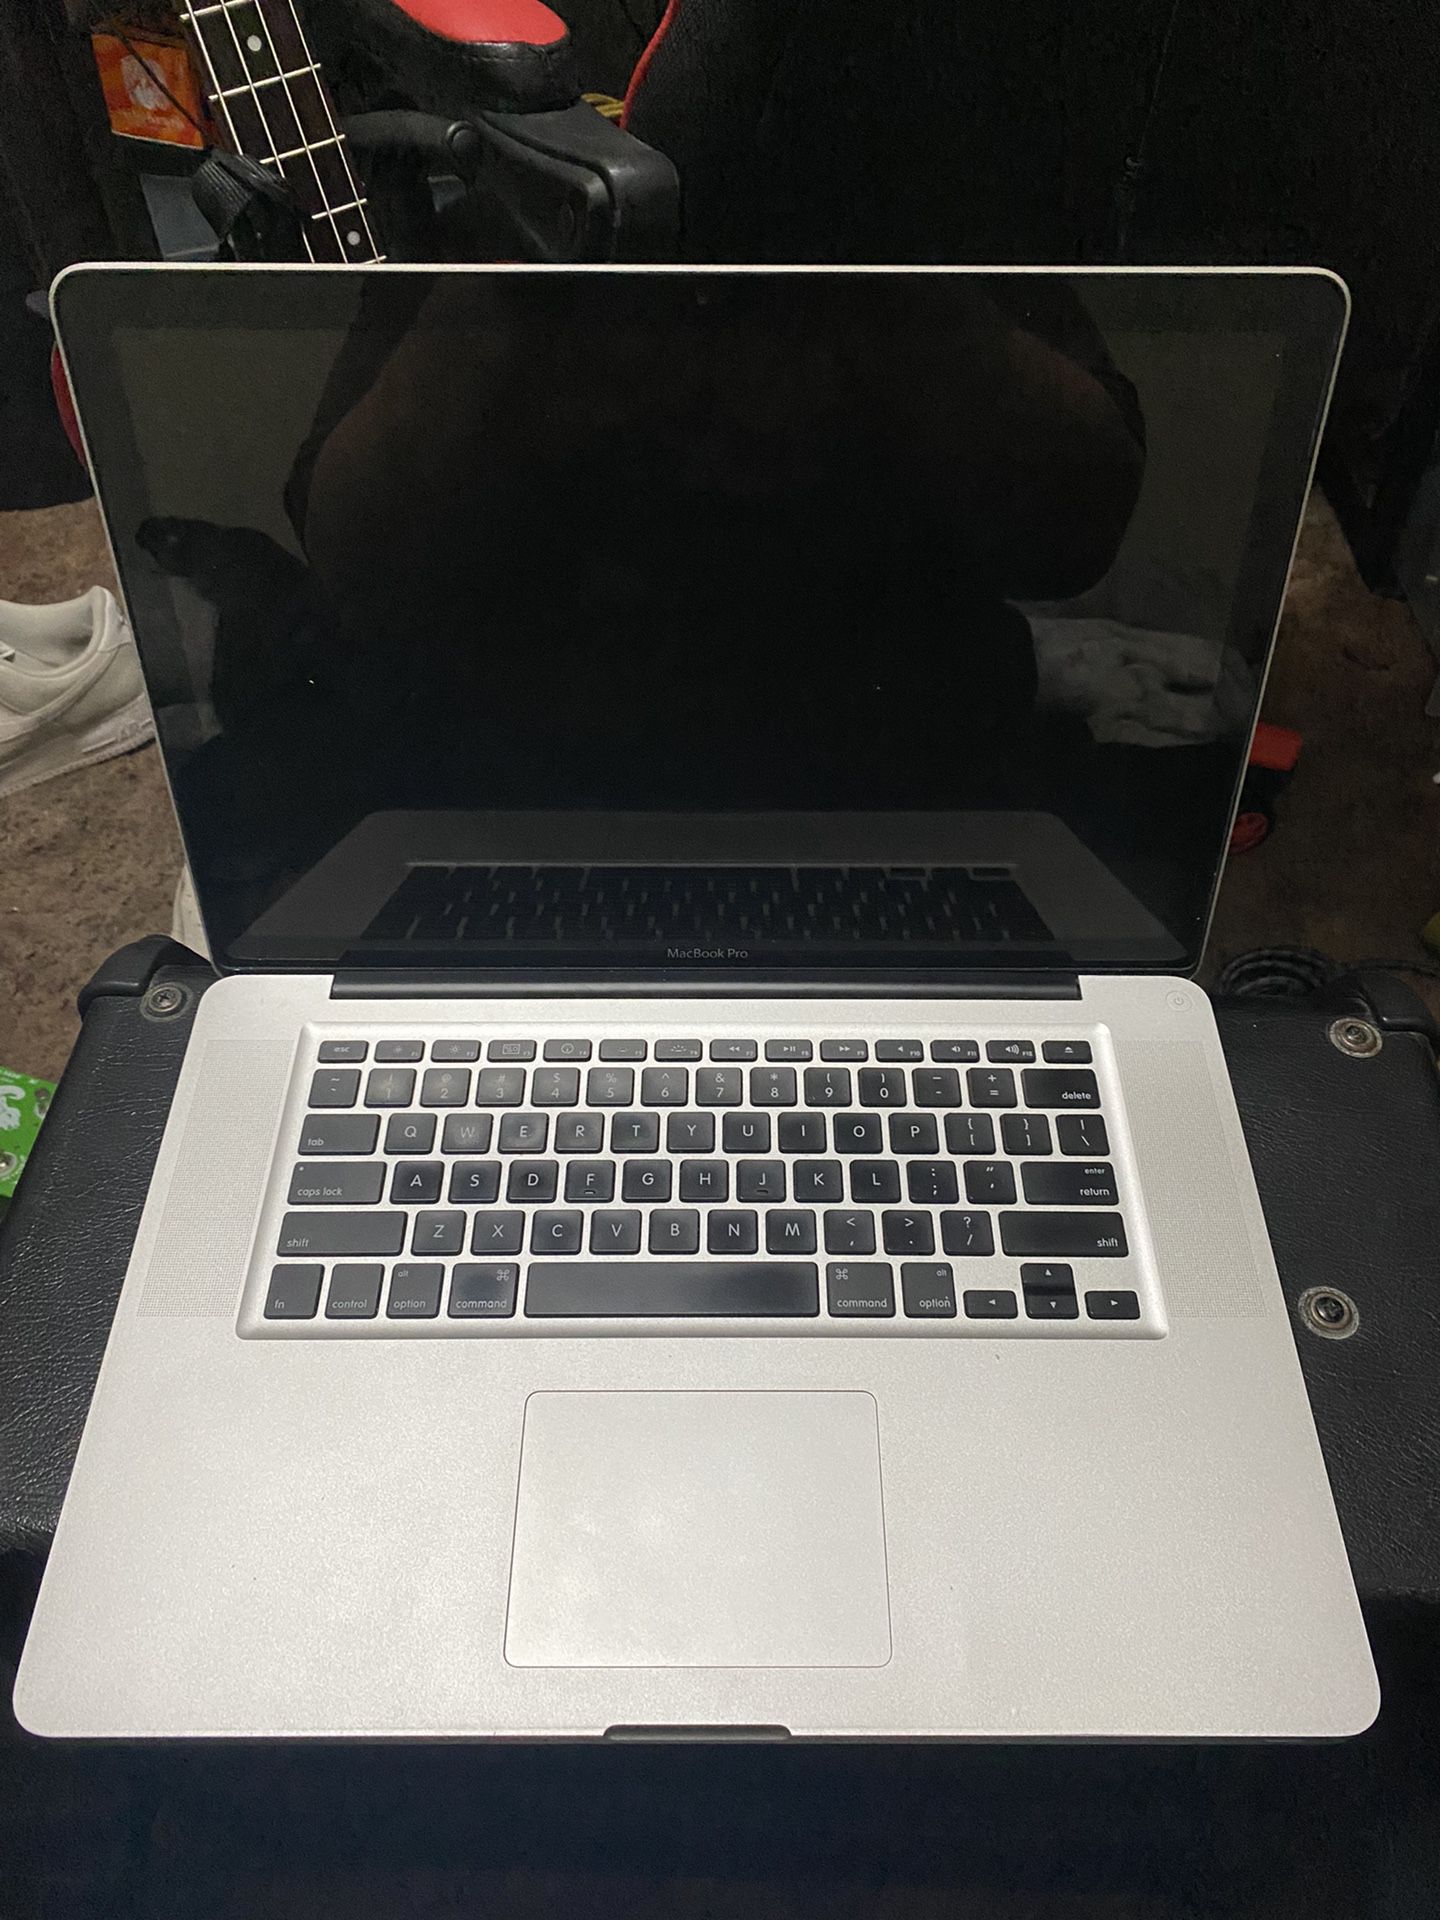 ( For Parts)MacBook Pro 15-Inch "Core i5" 2.53 Mid-2010